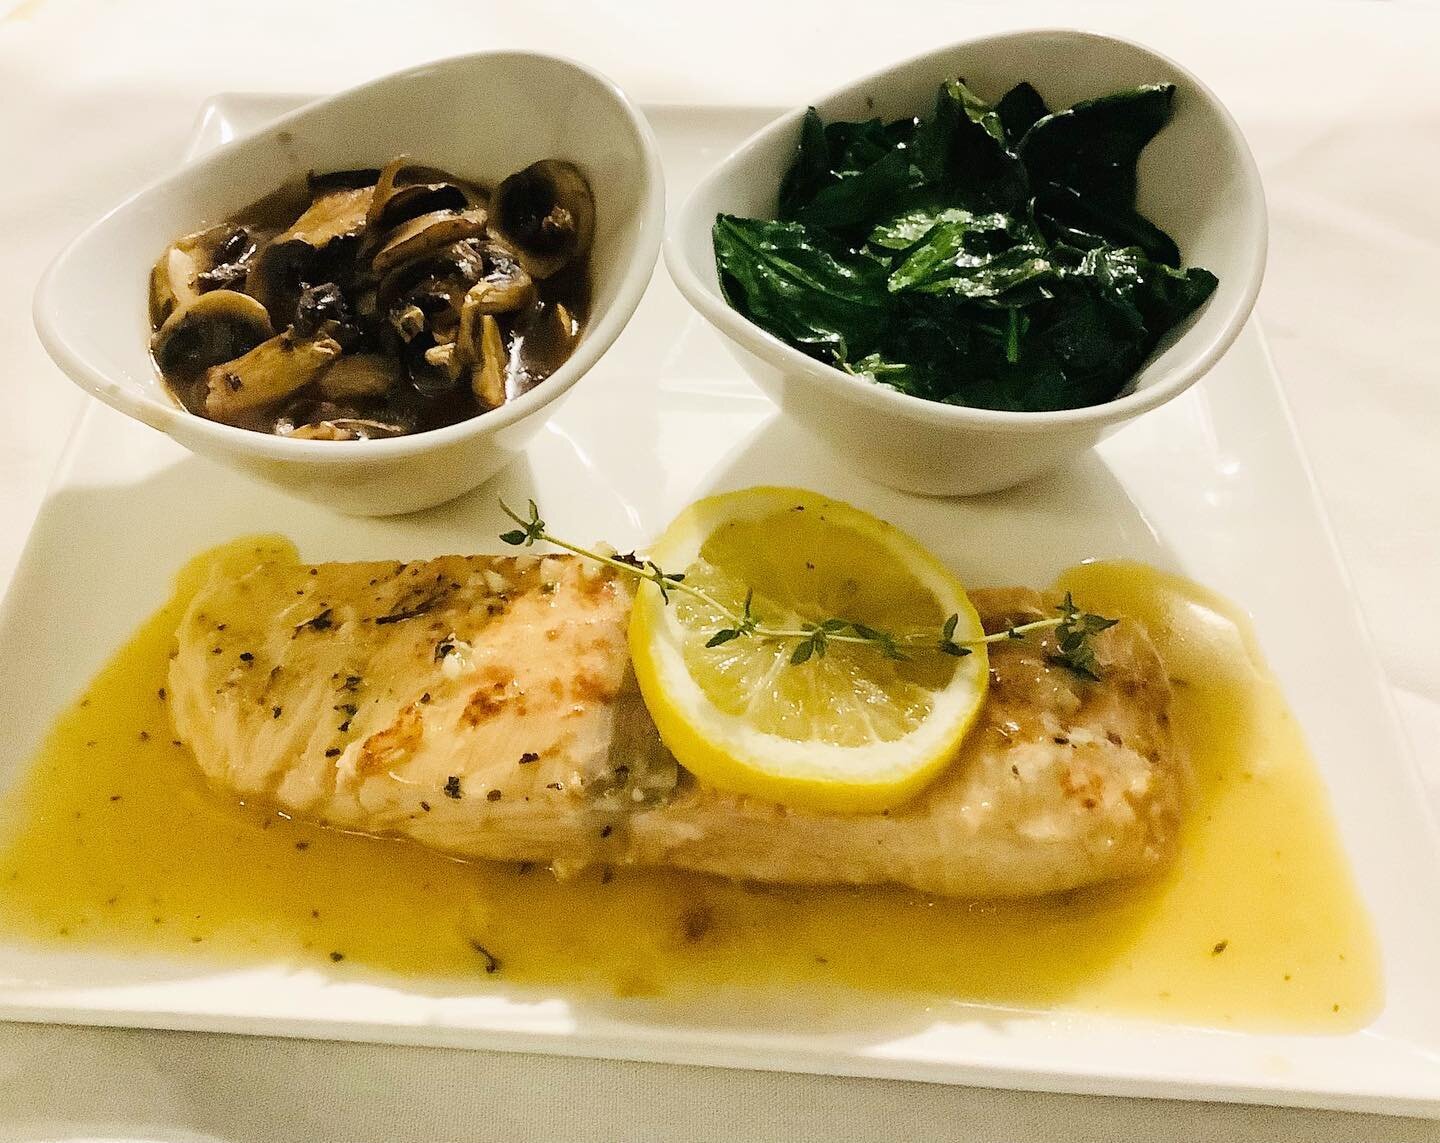 Perfectly saut&eacute;ed Salmon with saut&eacute;ed mushrooms and spinach. 

Join us this weekend.